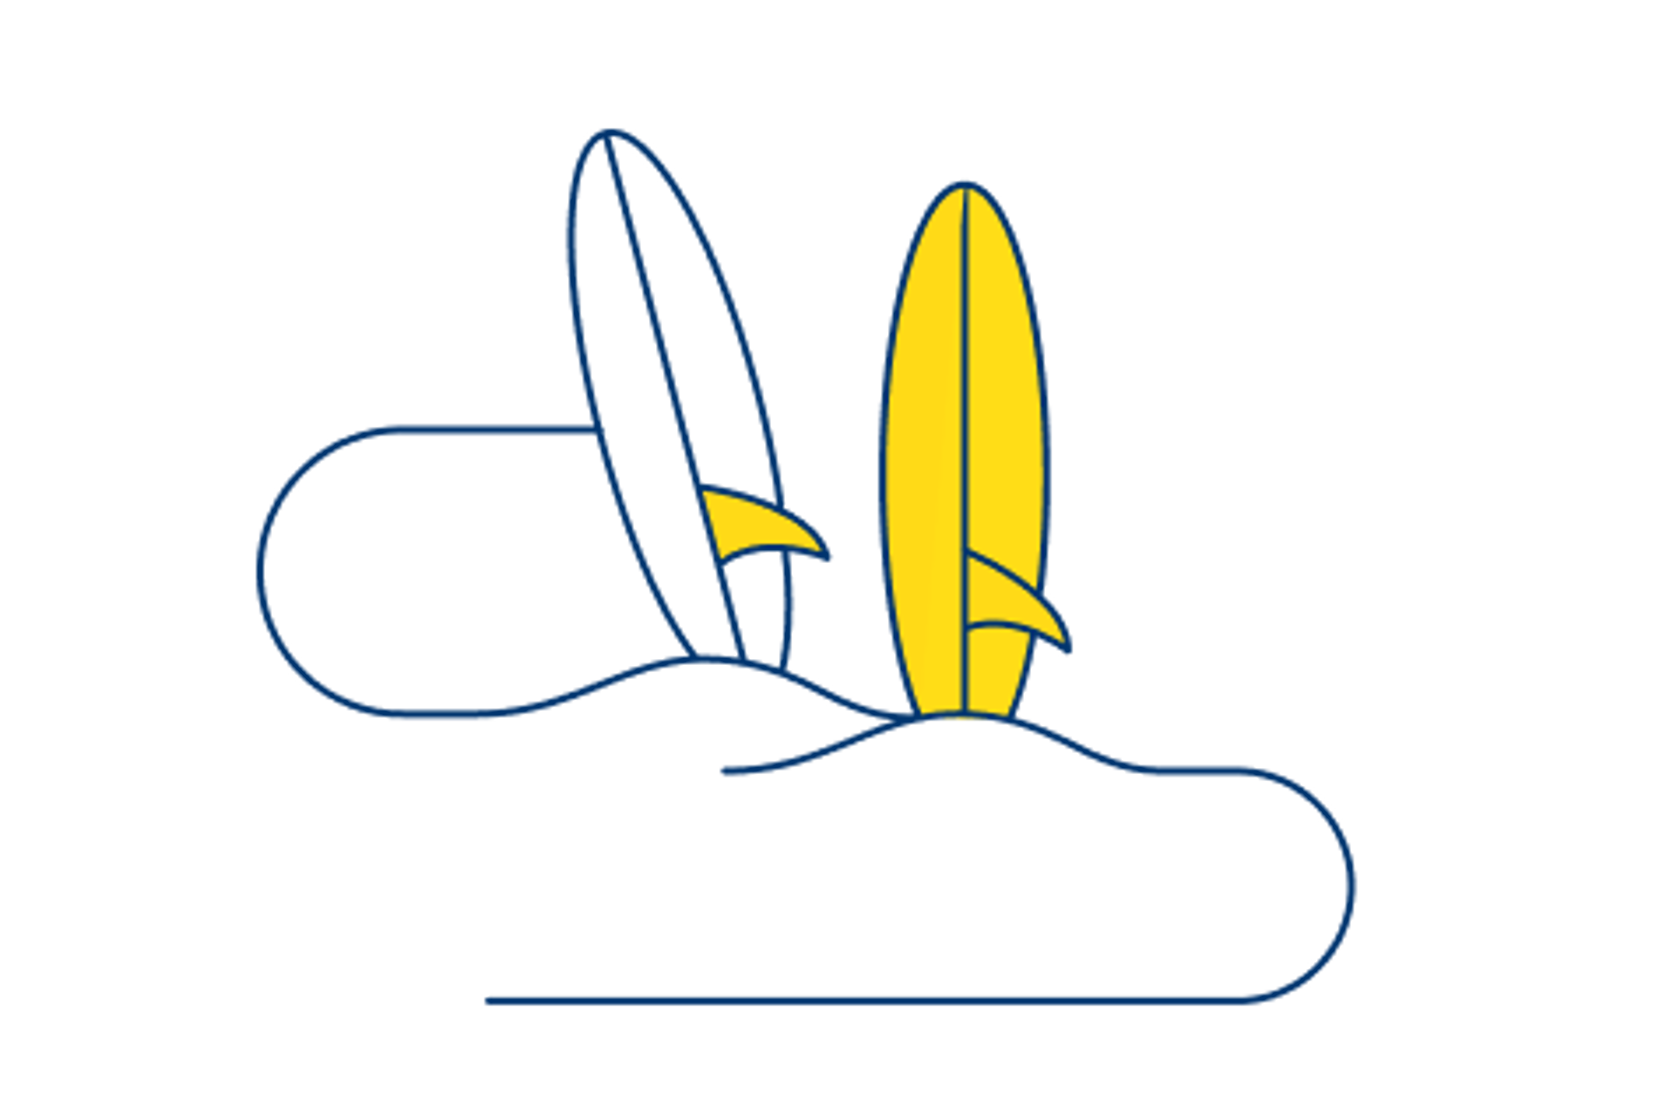 Illustration of surfboards in the sand